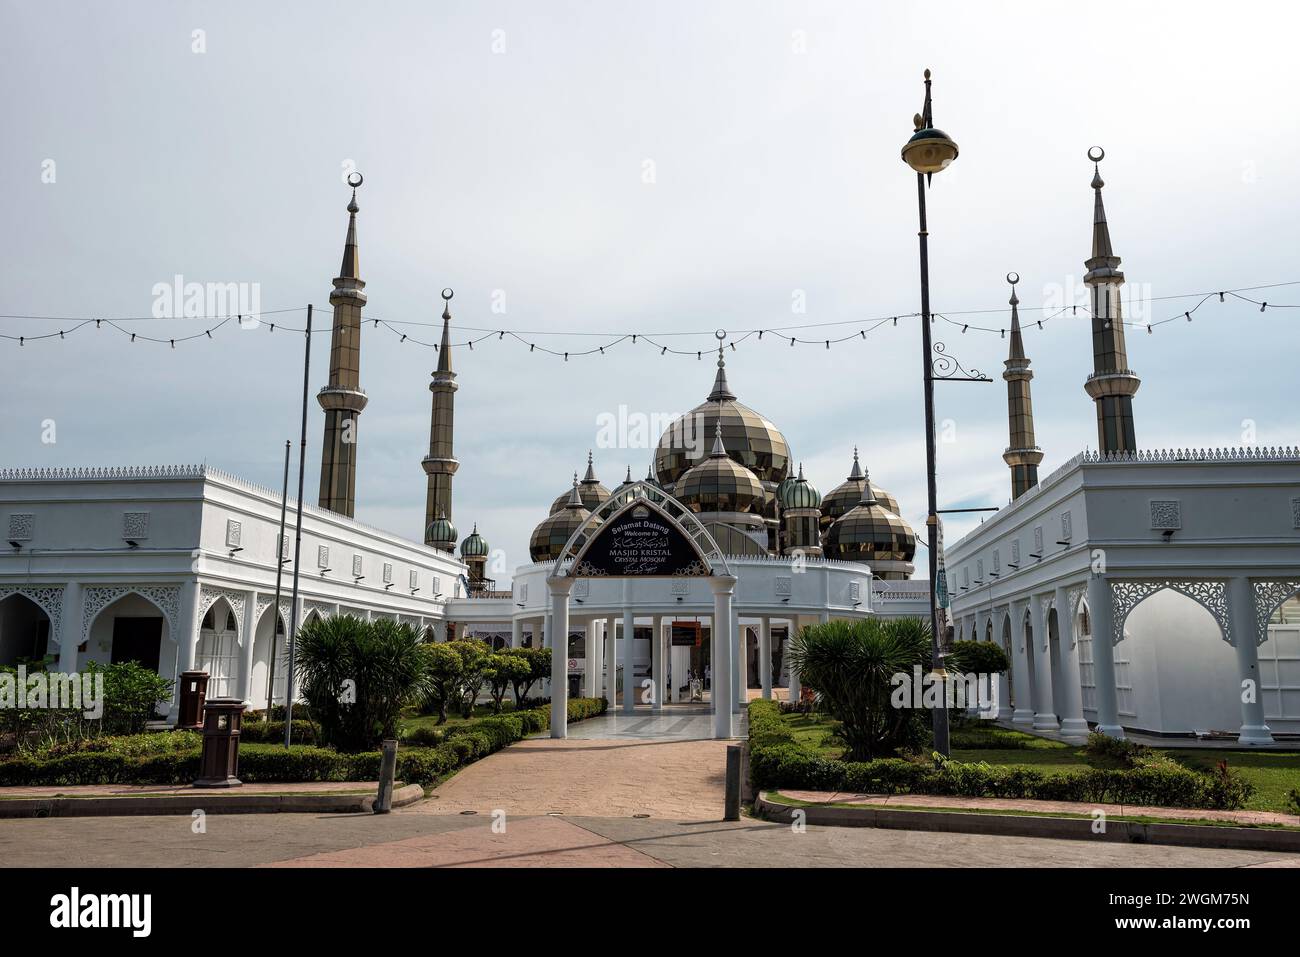 Crystal Mosque, Terengganu, Malaysia - A grand structure made of steel, glass and crystal. The mosque is located at Islamic Heritage Park on the islan Stock Photo